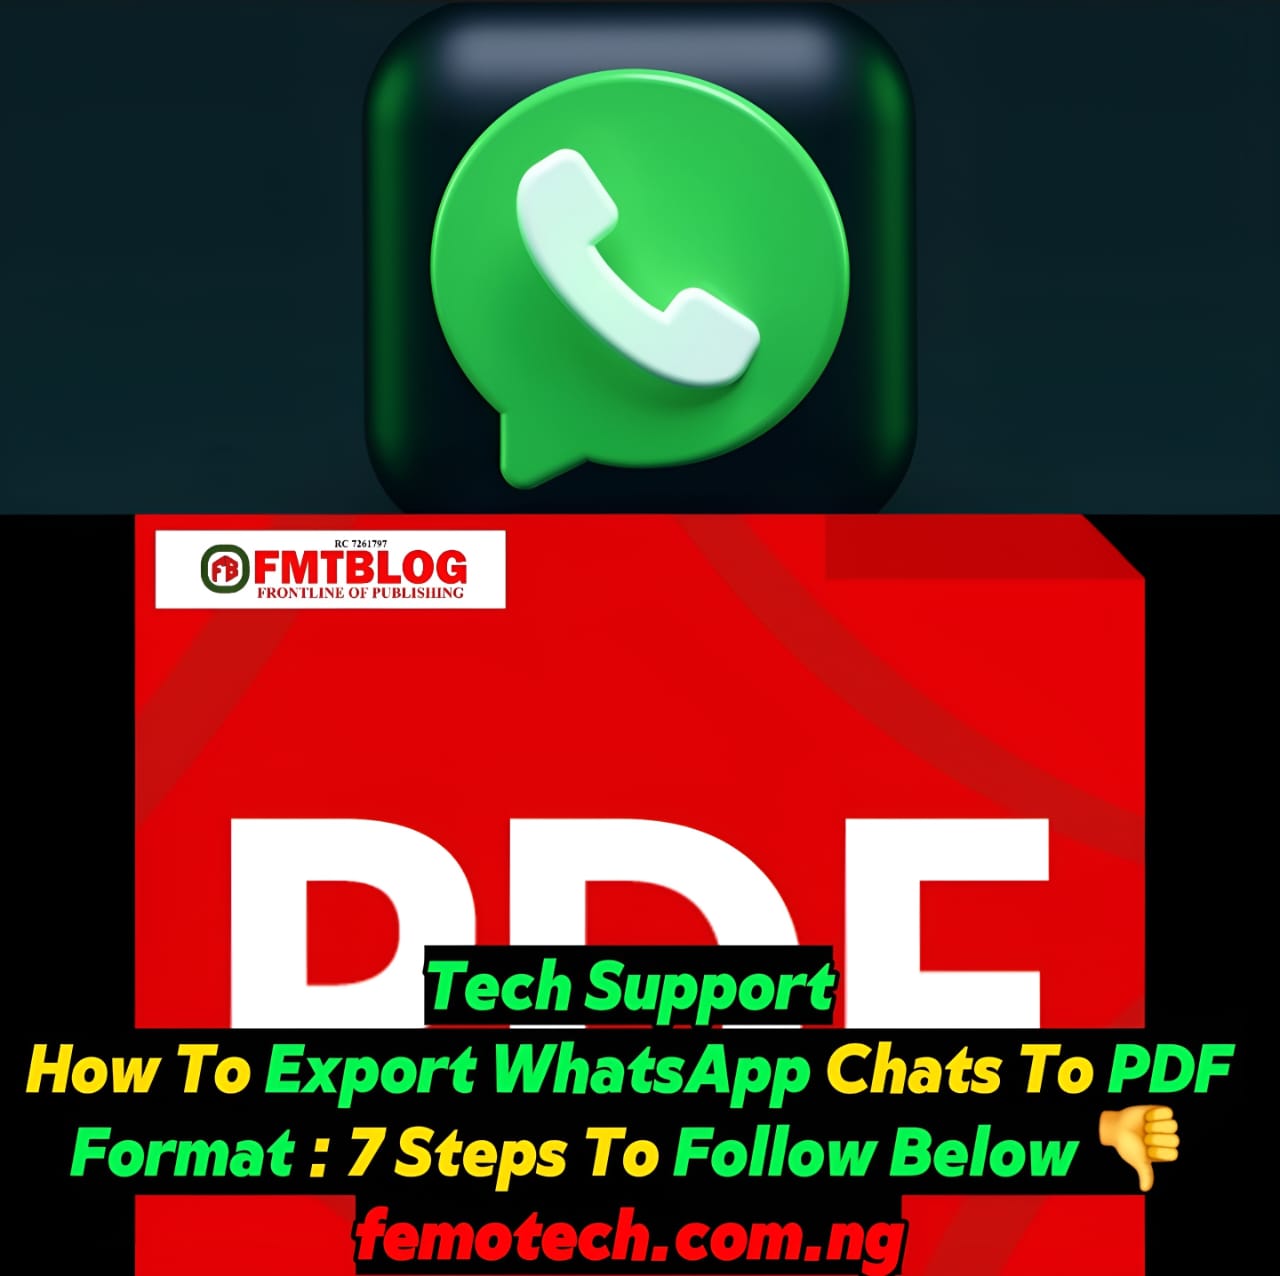 How To Export WhatsApp Chats To PDF Format : 7 Steps To Follow Below ?